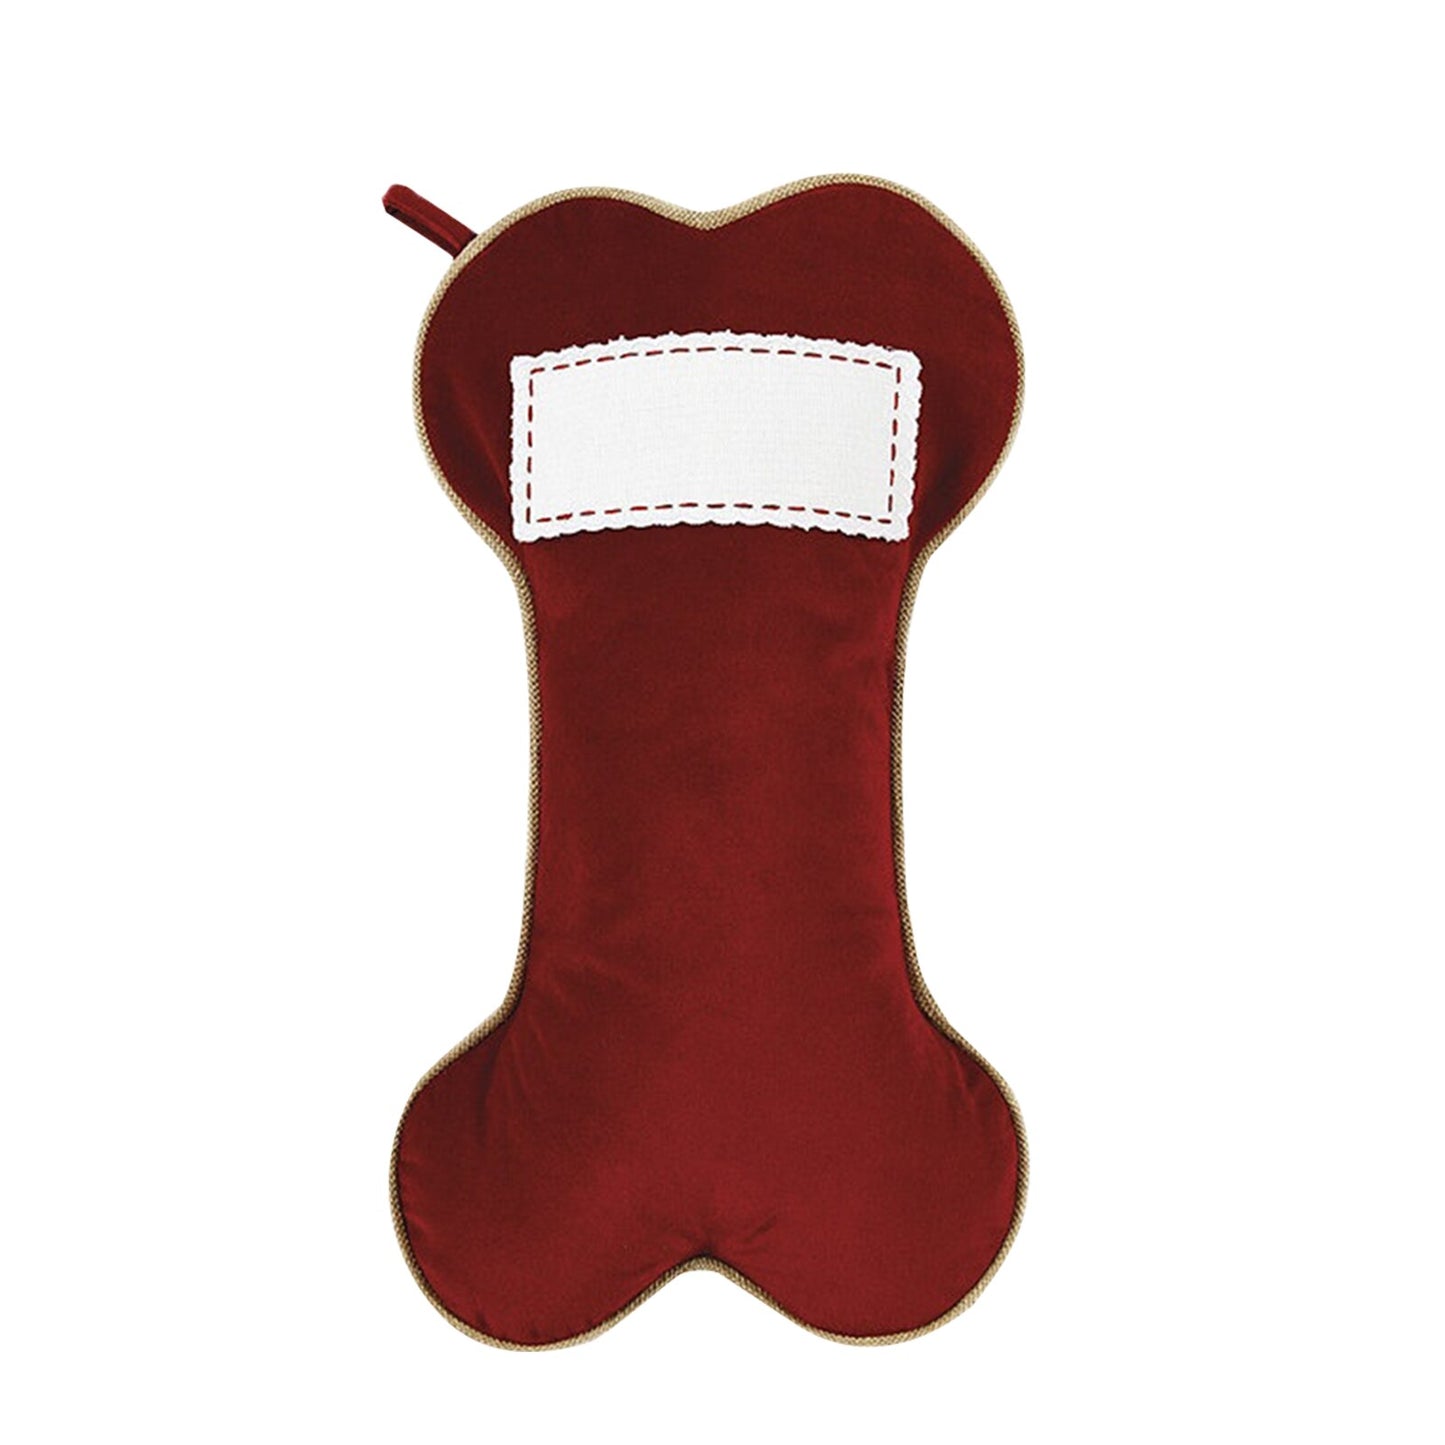 Large capacity bone-shaped Christmas stocking to hold lots of little gifts for your sweetheart